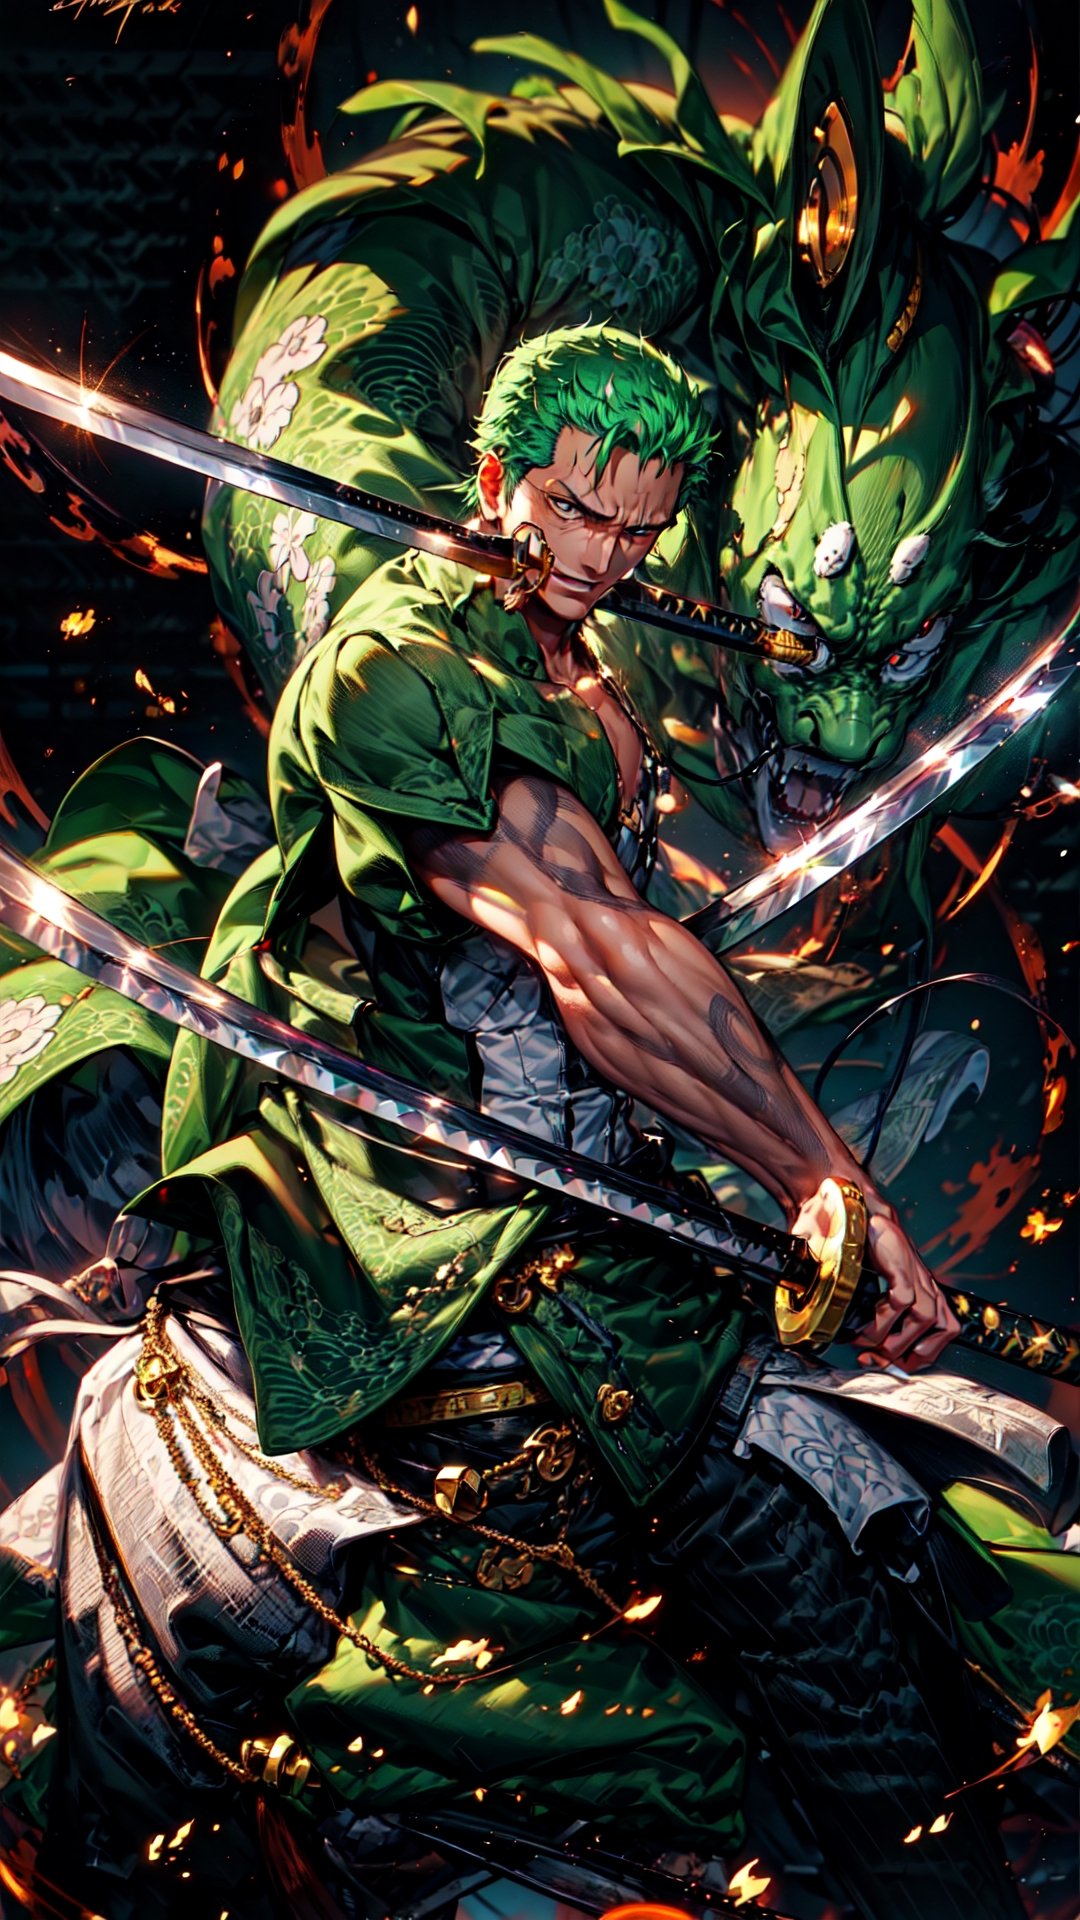  Roronoa Zoro, the iconic character from the One Piece anime:

"Generate a striking and highly detailed visual representation of the legendary swordsman, Roronoa Zoro, from the One Piece anime. Zoro is known for his distinctive appearance and formidable skills.

His hair is a vibrant shade of green, complementing his determined brown eyes. He stands tall and resolute, exuding an air of strength and unwavering determination. Zoro is clad in his signature green outfit, complete with a white haramaki and a bandana.

In his skilled hands, he wields not one but two katana swords, each one unique and finely detailed. The swords should be a reflection of his mastery and the essence of his character.

This image should capture the essence of Zoro's iconic appearance, showcasing his powerful presence and his status as one of the most beloved characters in the One Piece series." Photographic cinematic super super high detailed super realistic image, 8k HDR super high quality image, masterpiece,perfecteyes,zoro, ((perfect hands)), ((super high detailed image)), ((perfect swords)),